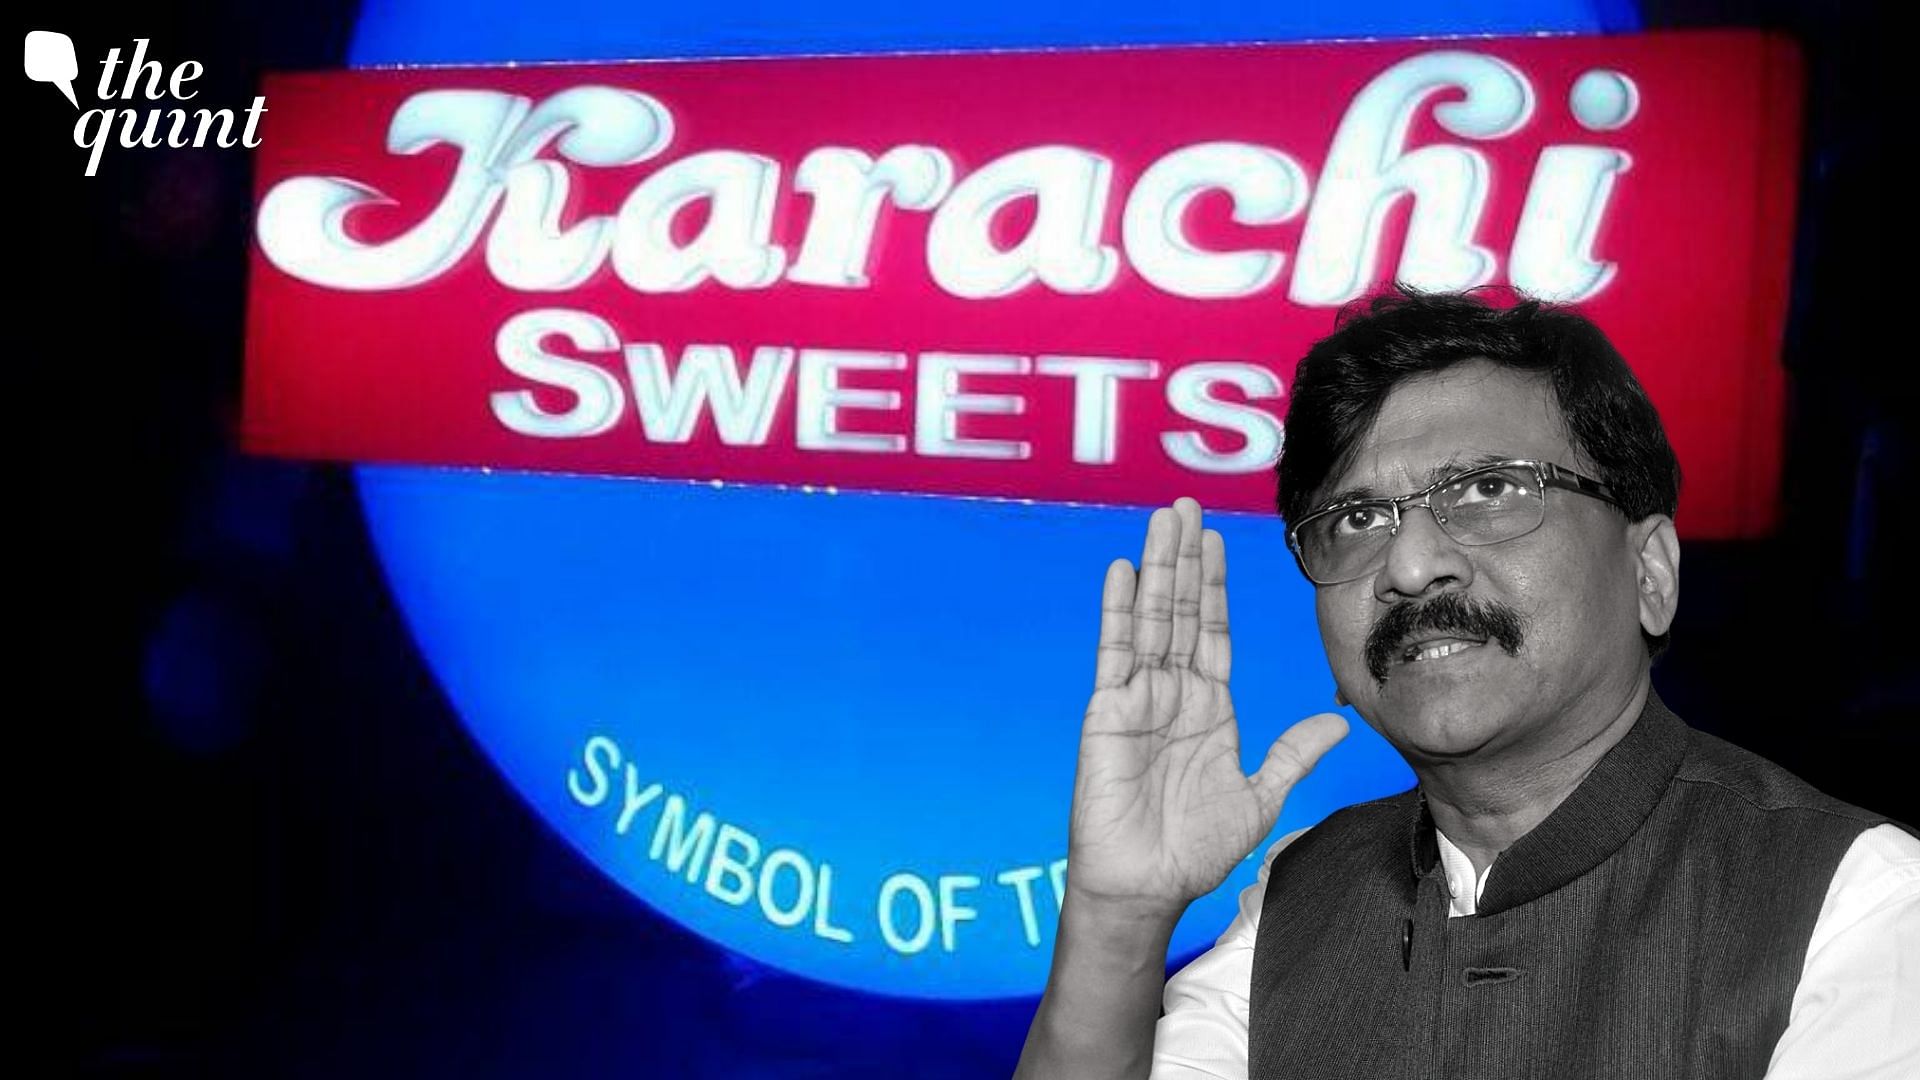 Demand for changing the name of Karachi Sweets is not Shiv Sena’s official stance, confirmed MP Sanjay Raut on Thursday, 19 November.